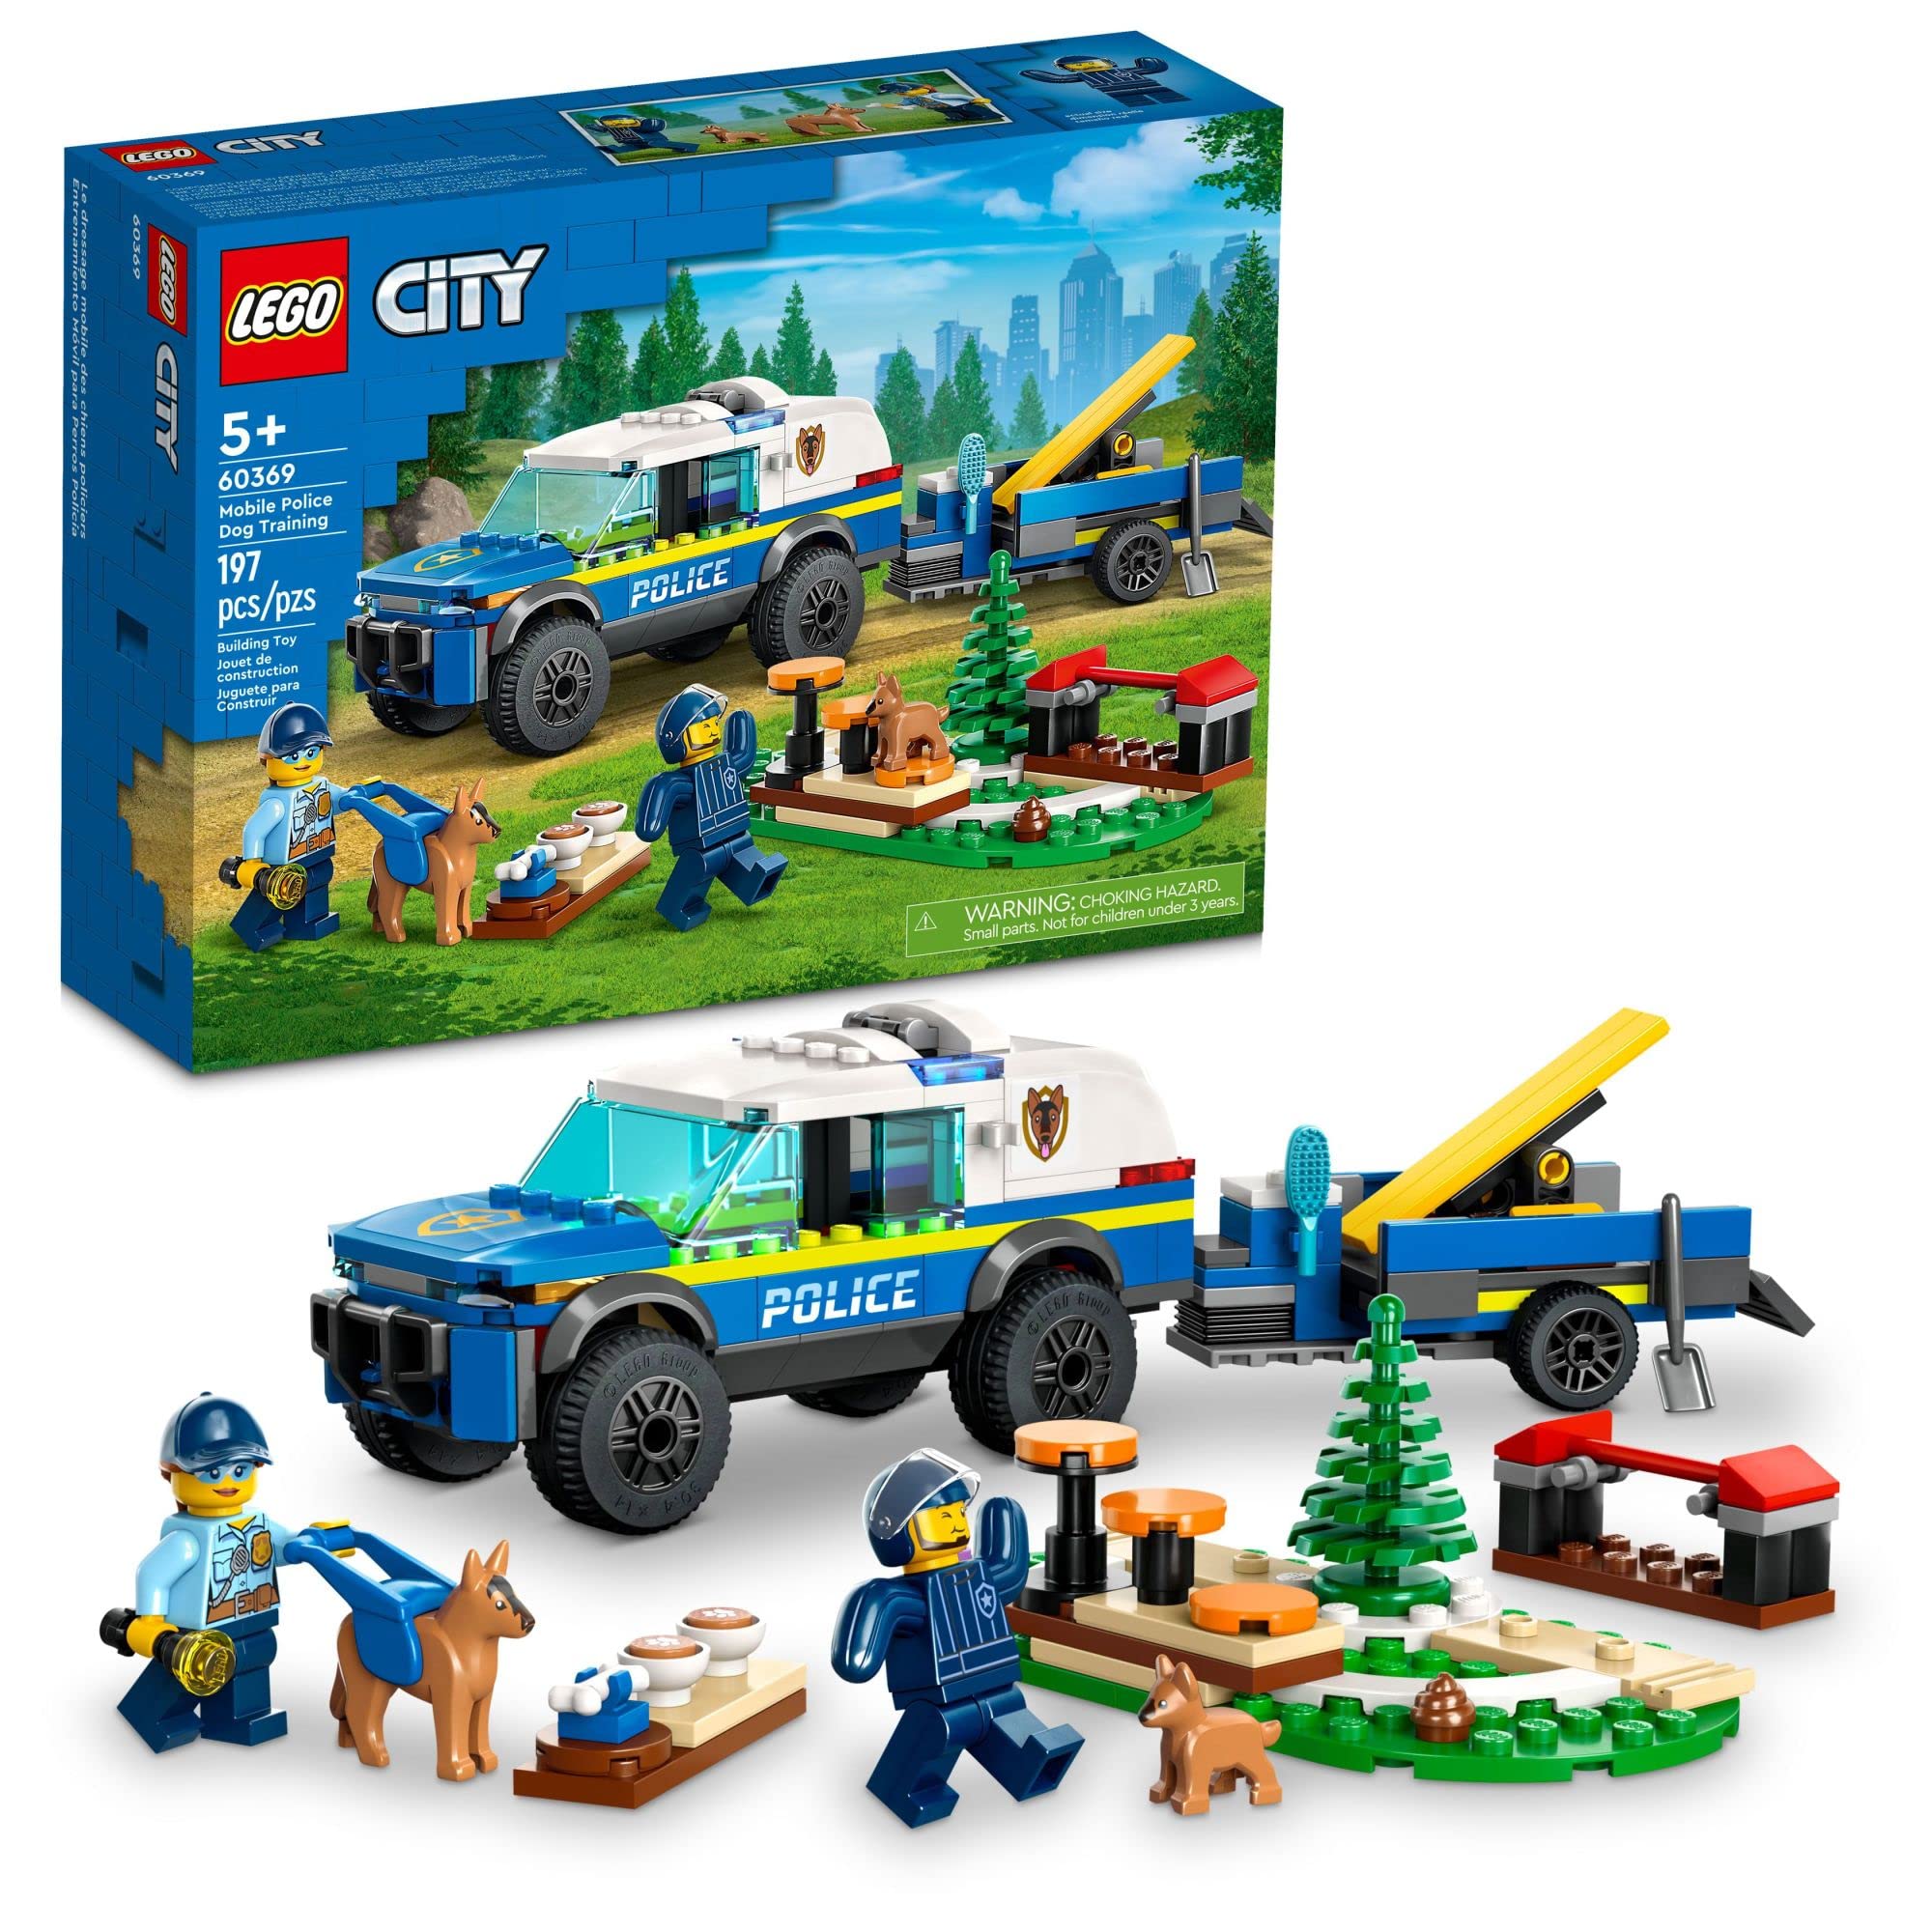 197-Piece LEGO City Mobile Police Dog Training w/ SUV Car, Trailer, Obstacle Course & Puppy Figures $19.20 + Free Shipping on $35+